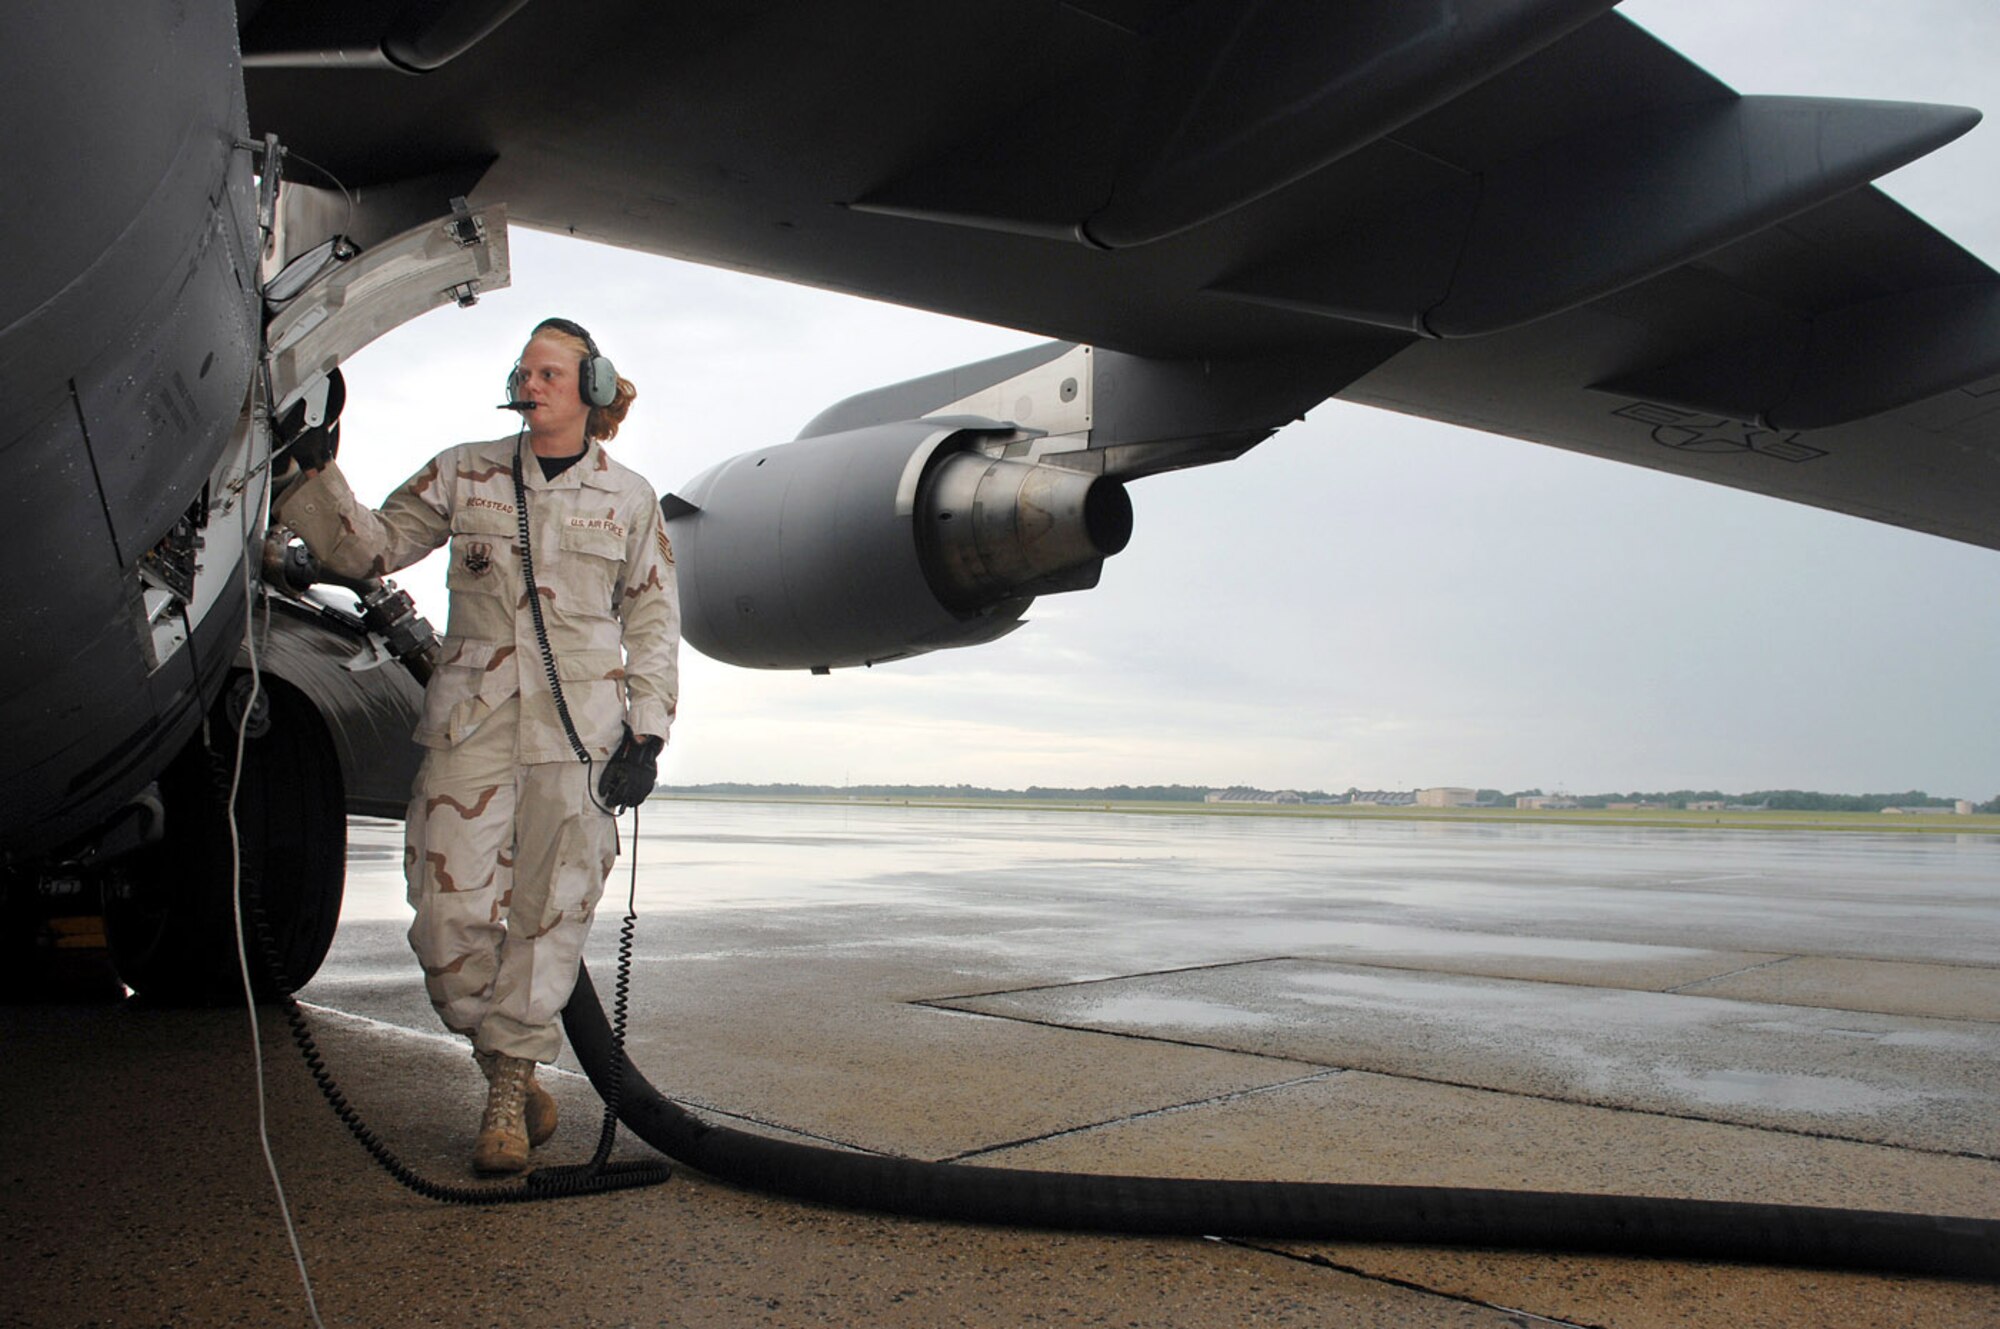 Staff Sgt. Angie Beckstead refuels a C-17 Globemaster III aircraft at Andrews Air Force Base, Md., June 12, 2007.  Coalition C-17s and C-130s provide airlift throughout the area of responsibility.  The aircraft moved 1,556 people and over 400 tons of supplies July 17.   Sergeant Beckstead is a crew chief from the 452nd Maintenance Squadron.  (U.S. Air Force photo/Tech. Sgt. Rick Sforza) 
